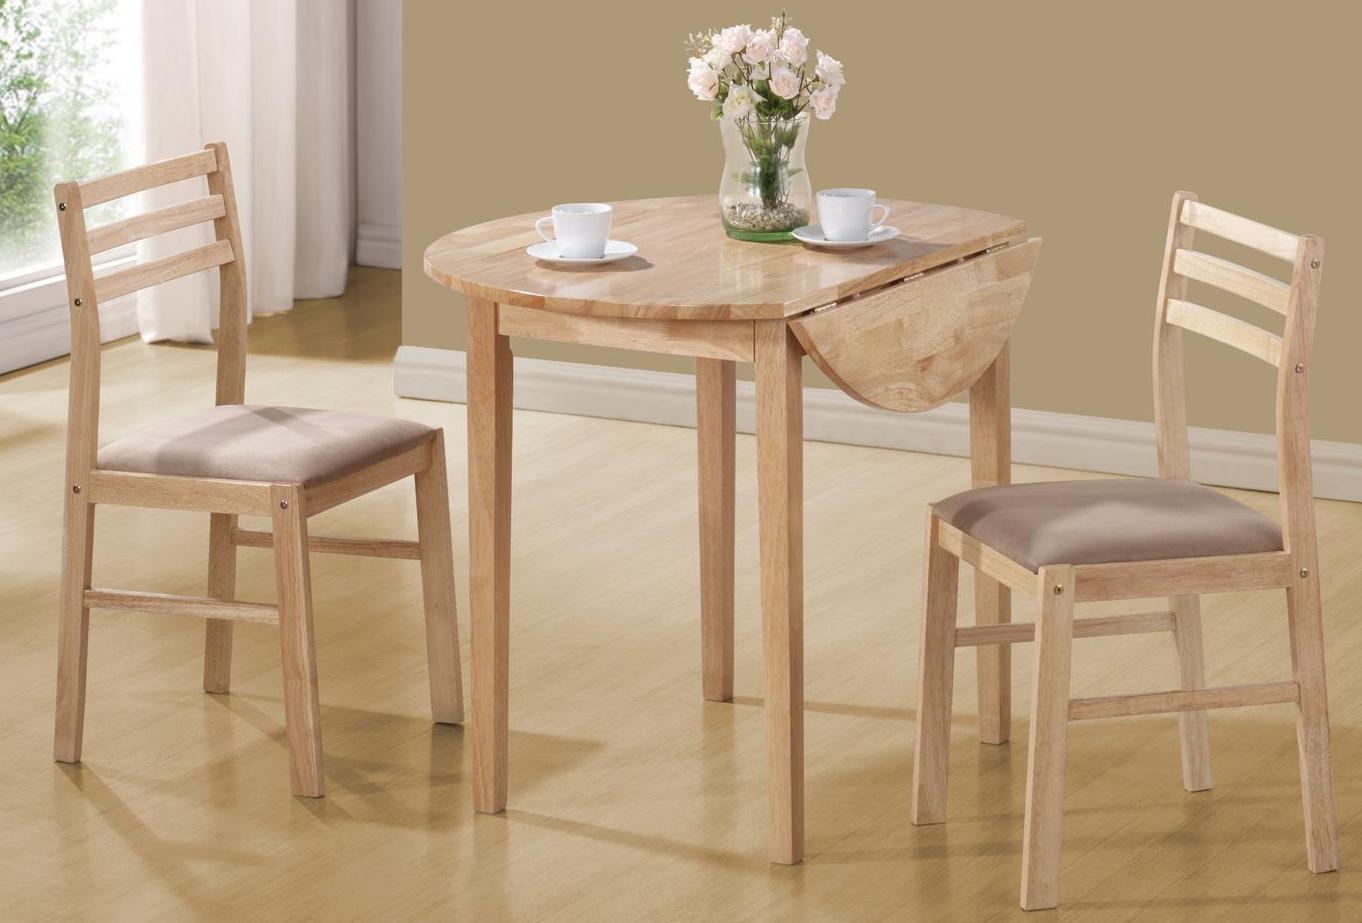 inexpensive square 3 piece kitchen table set